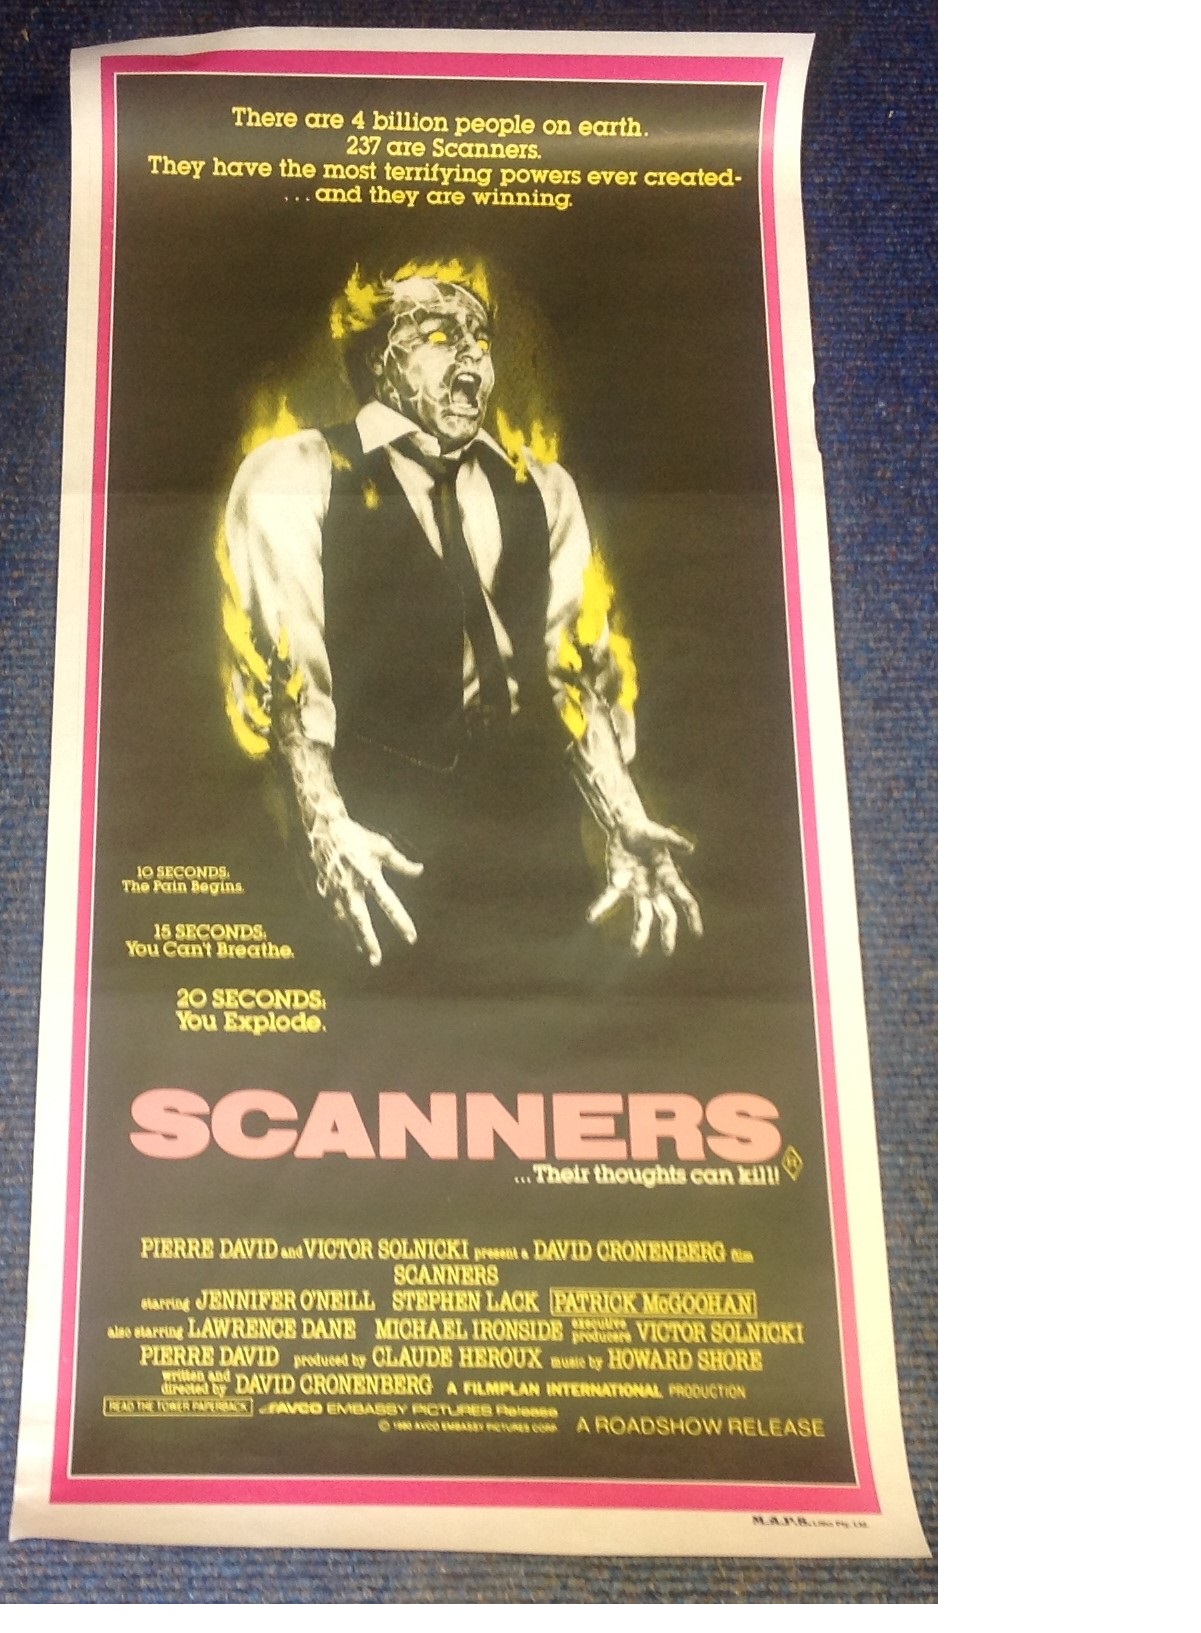 Scanners 1981 David Cronenberg Original Film Daybill Poster. Good Condition. All signed pieces